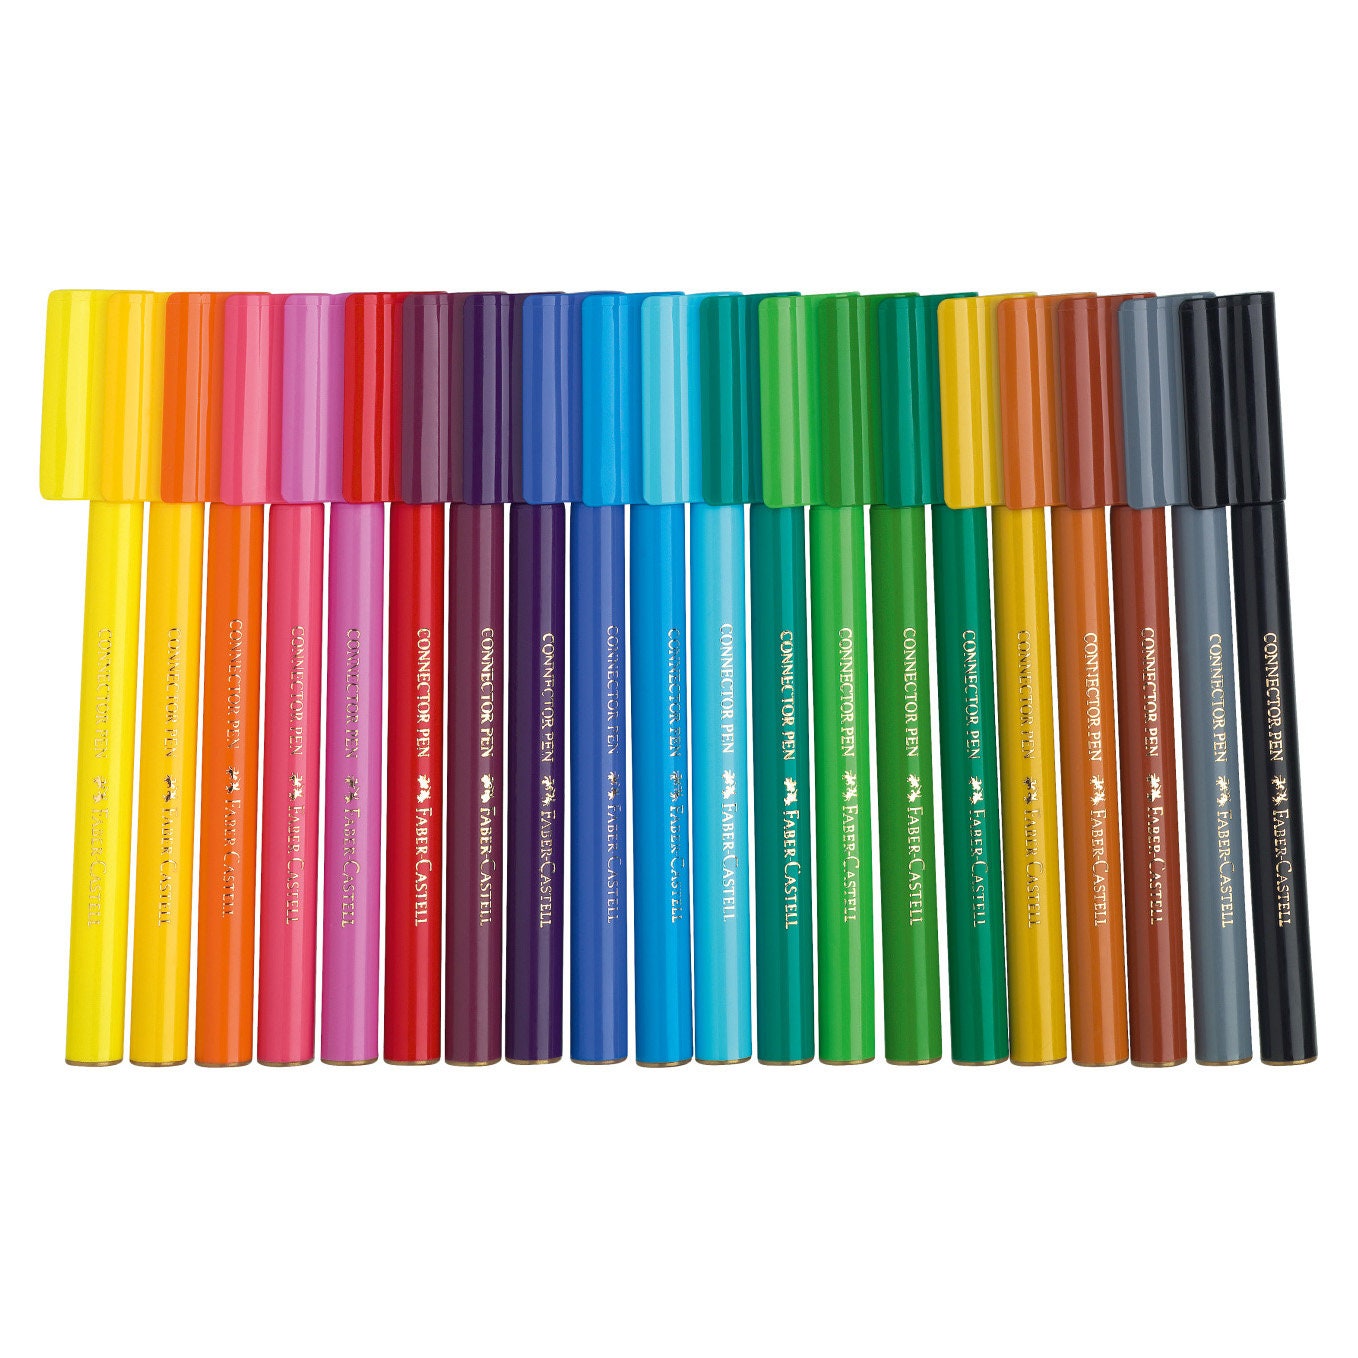 Faber-Castell Connector Pen Colour Markers Assorted Wallet of 12 - Impact